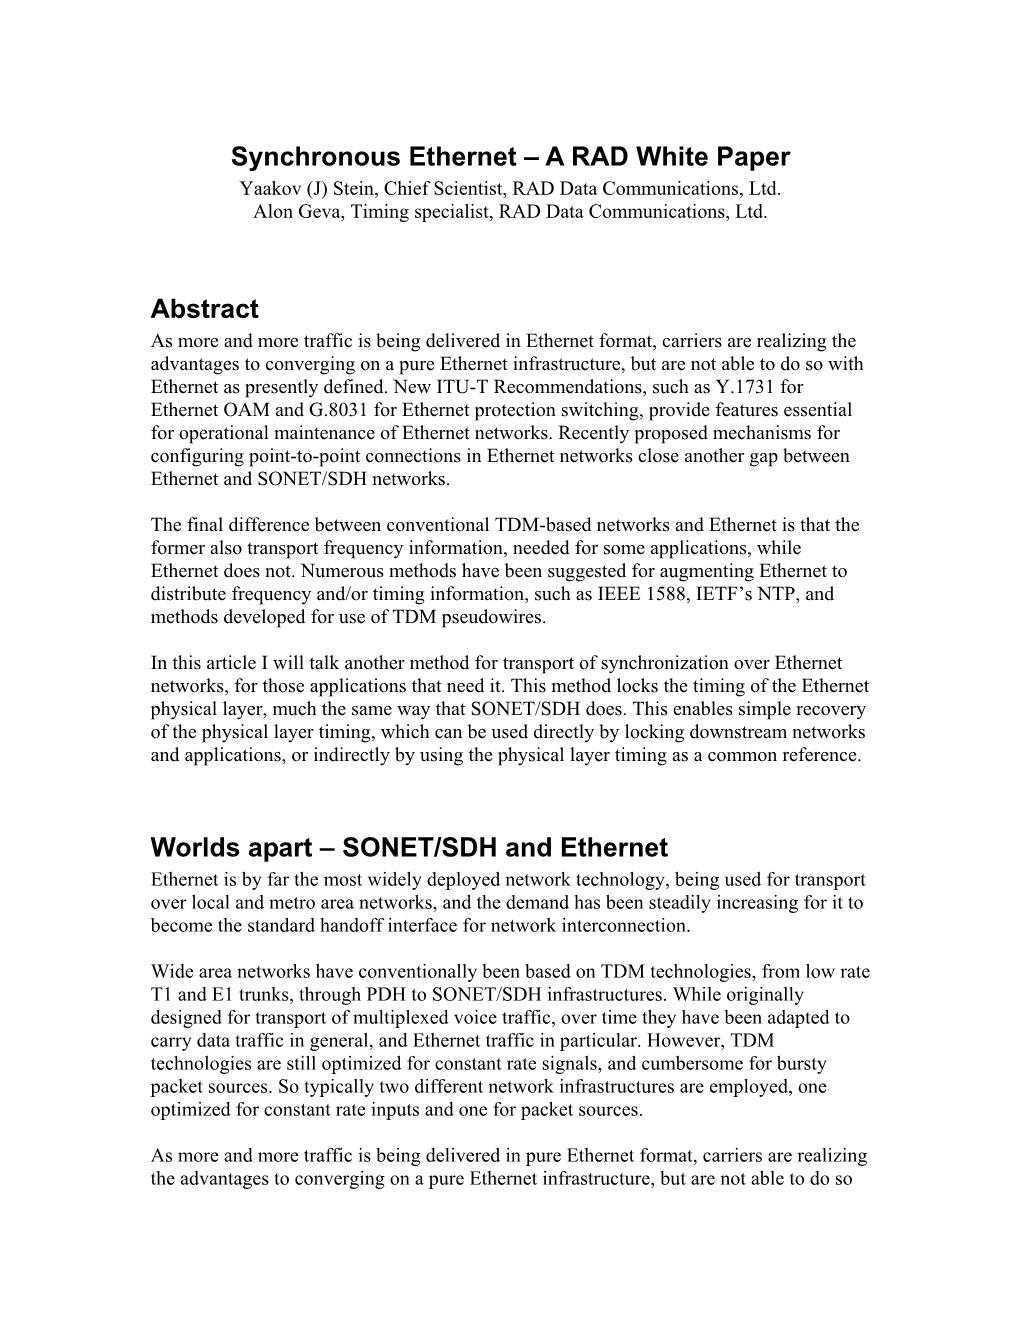 A RAD White Paper Abstract Worlds Apart – SONET/SDH and Ethernet